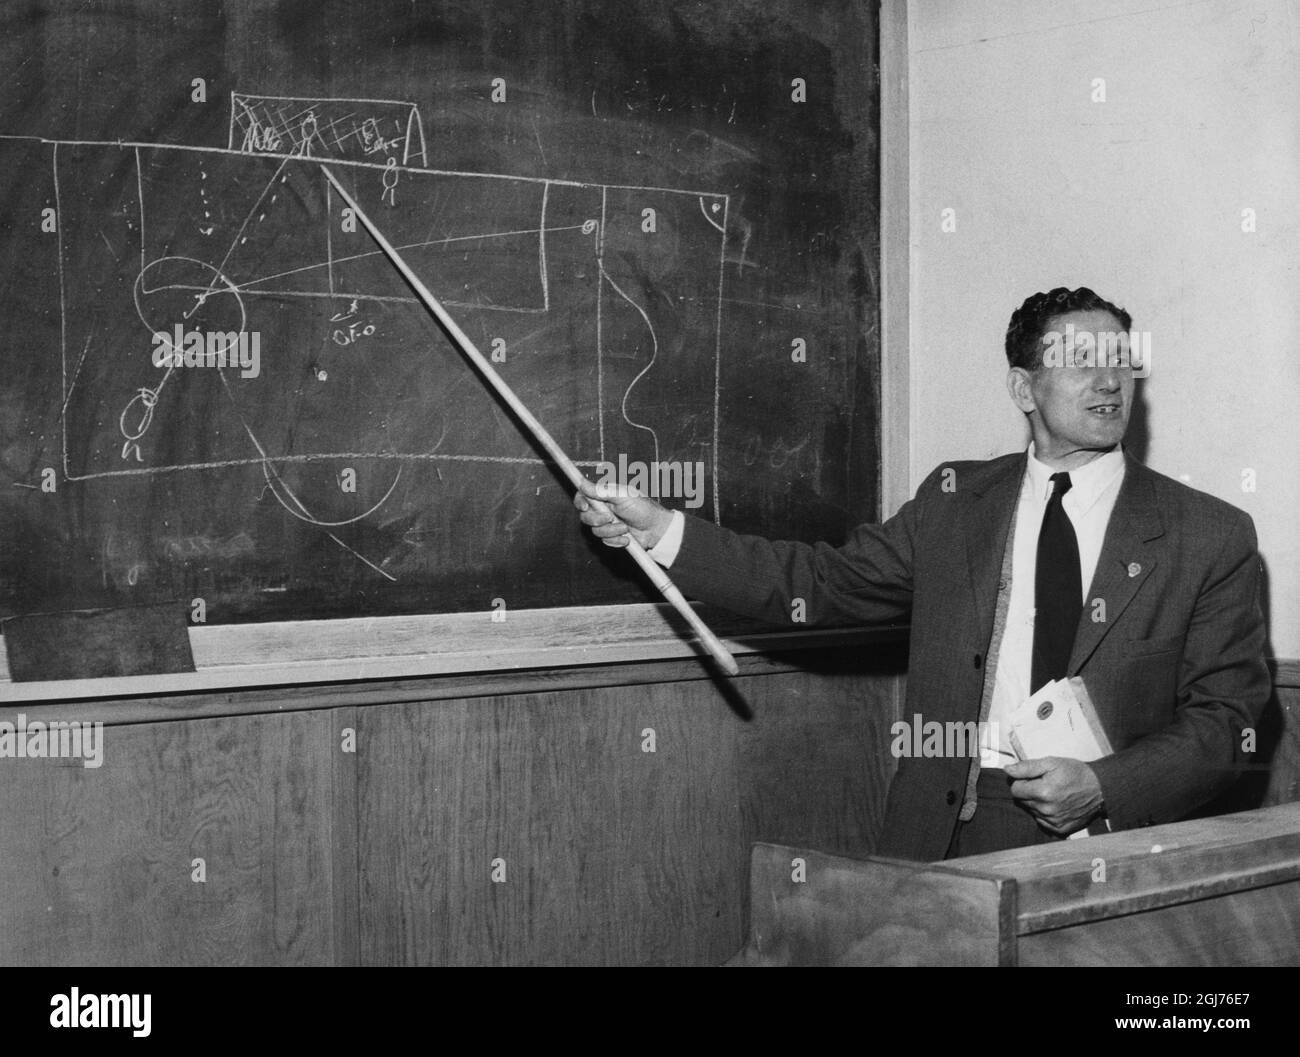 STOCKHOLM 1957-06-06 National team coach George Raynor explains football tactics on the blackboard at Lillsveds education center outside Stockholm. George Raynor (1907-1985), English footballer and manager. He was the coach of Sweden's national football team during the 1940 - and 1950's. He led them to Olympic gold in 1948 and Olympic bronze 1952. In the World Cup, he managed to take Sweden to a bronze in 1950 and silver 1958. Stock Photo